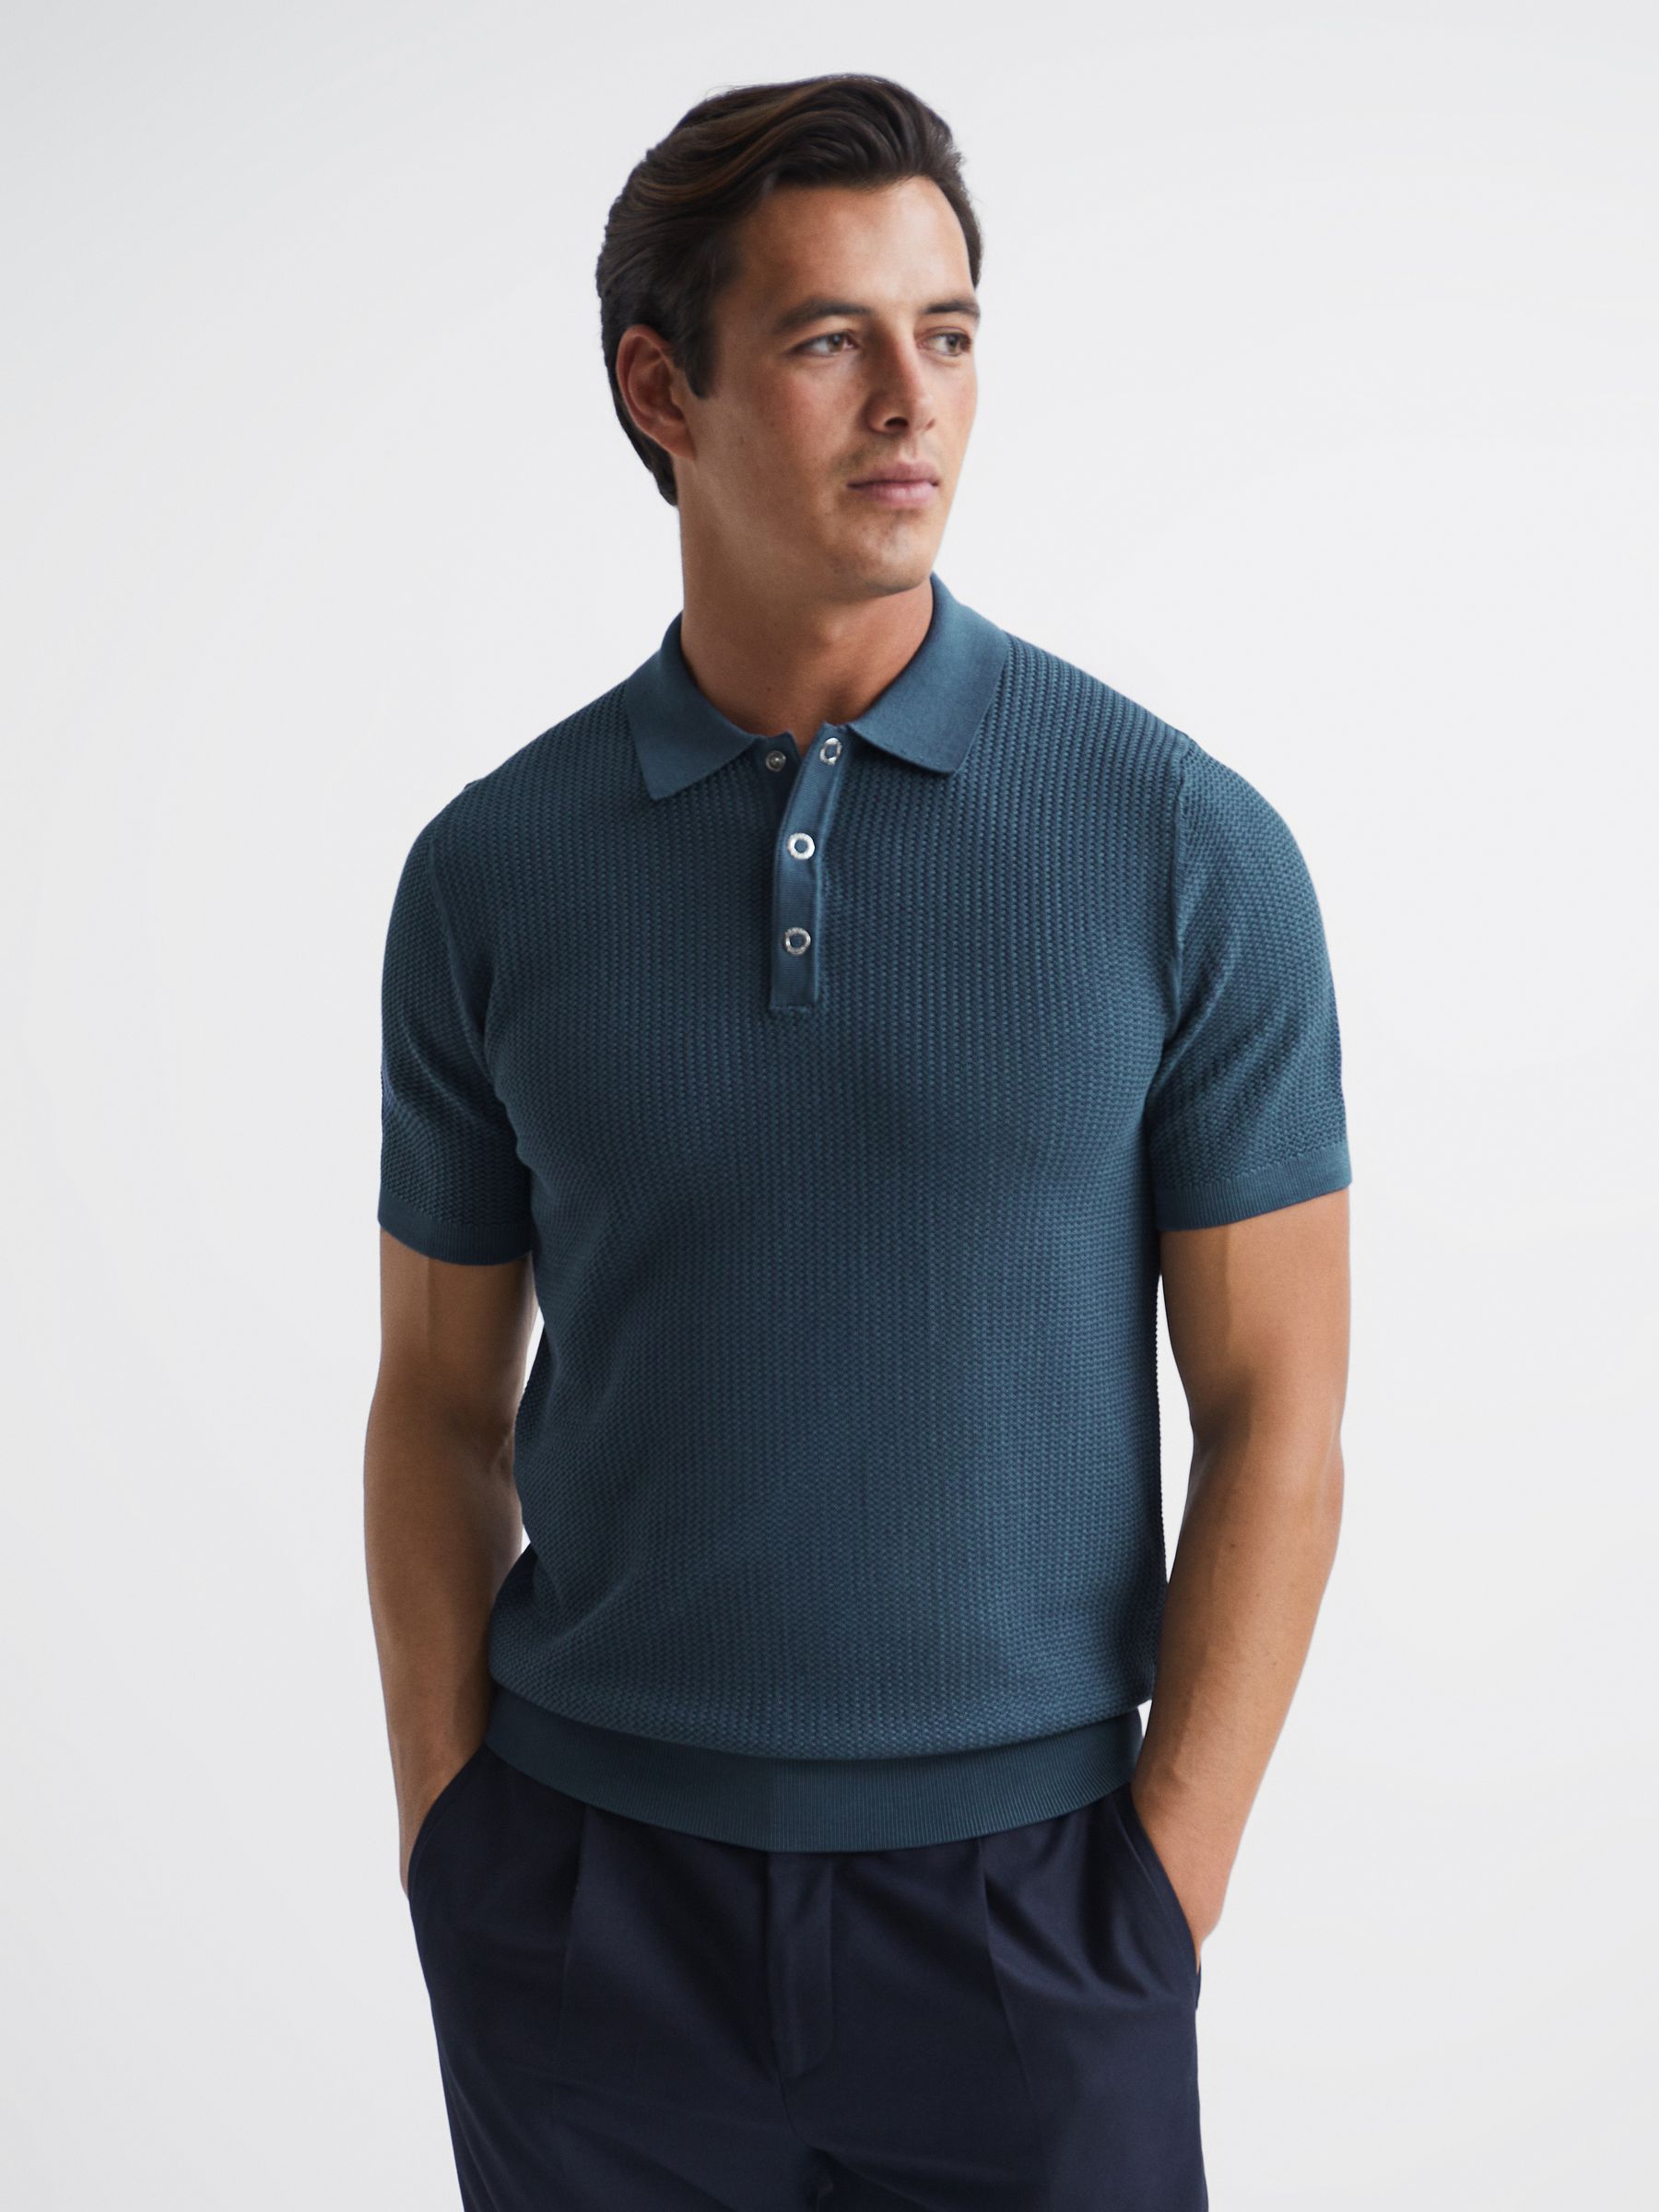 Press Stud Textured Polo Shirt in Airforce Blue - REISS